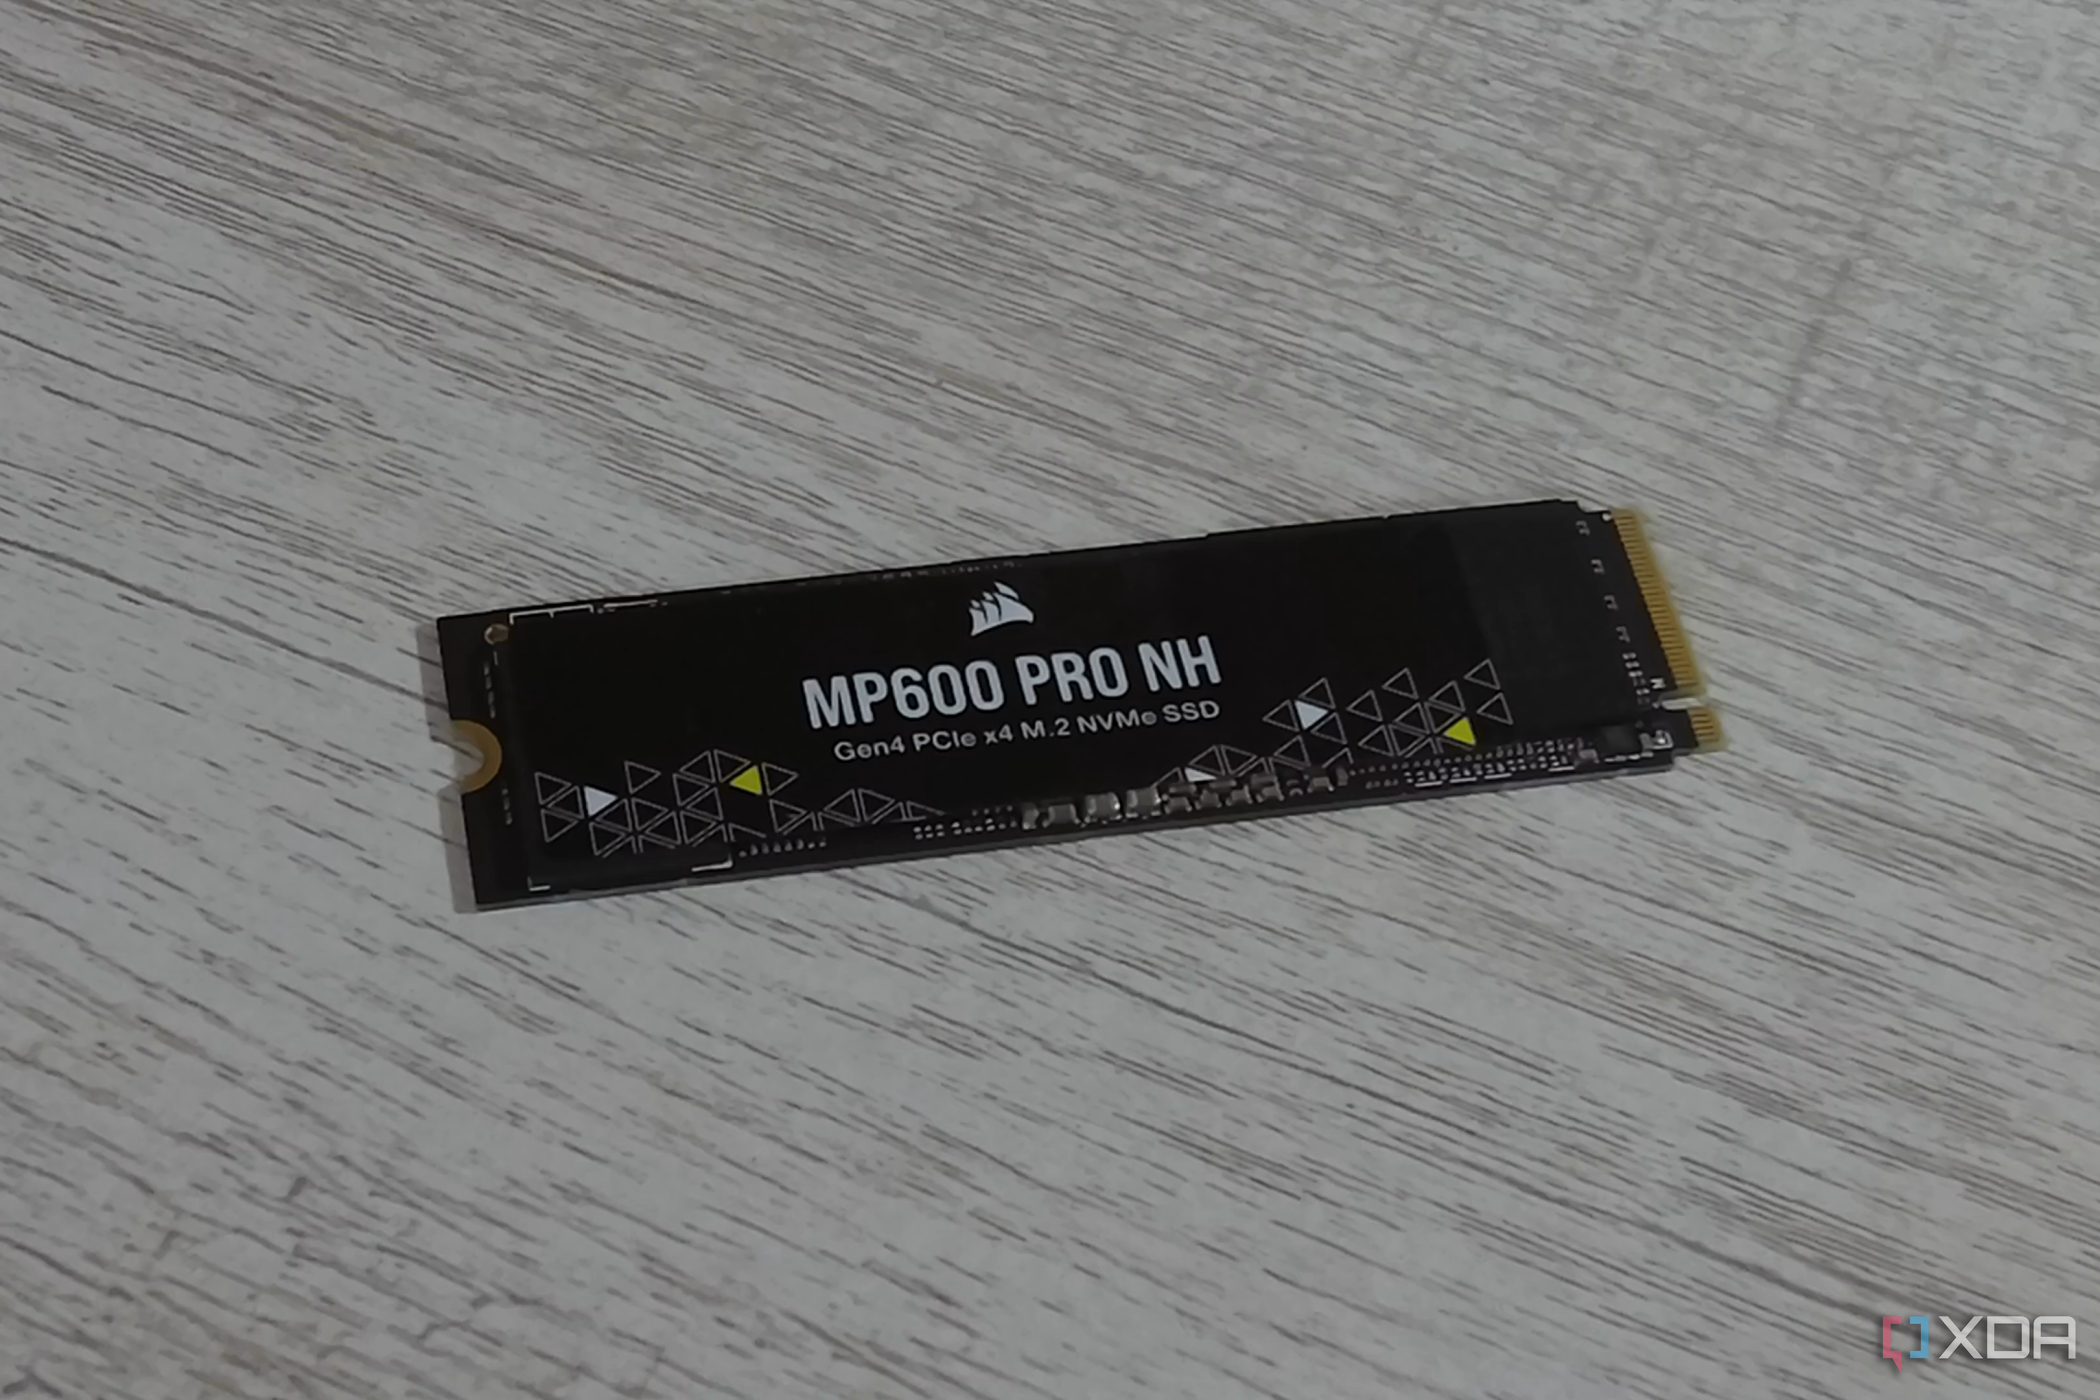 Corsair MP600 Pro M.2 NVMe SSD Review: Faster Speed, Less